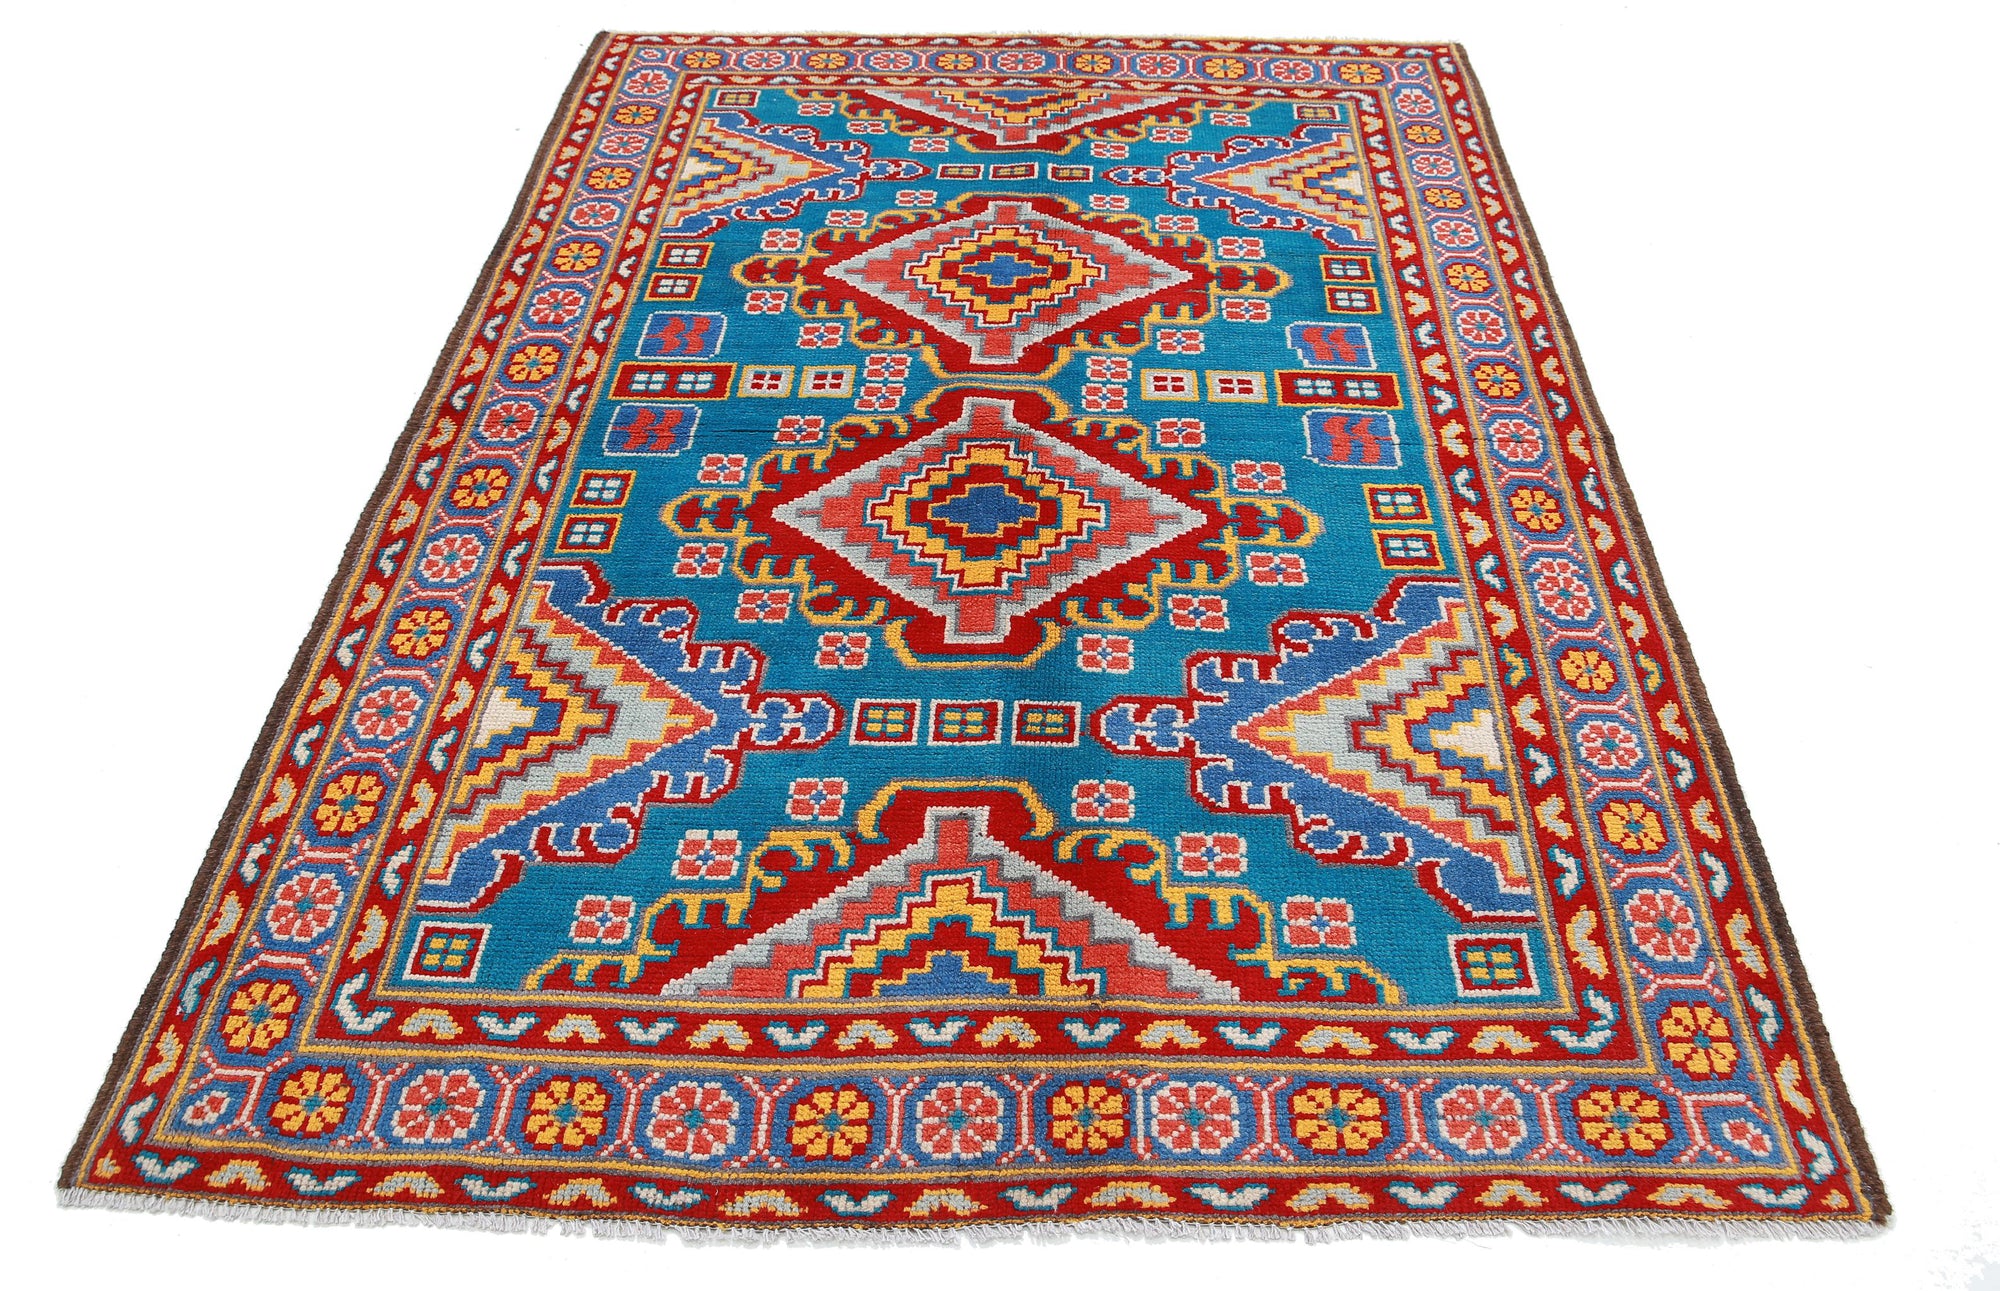 Revival-hand-knotted-qarghani-wool-rug-5014227-3.jpg